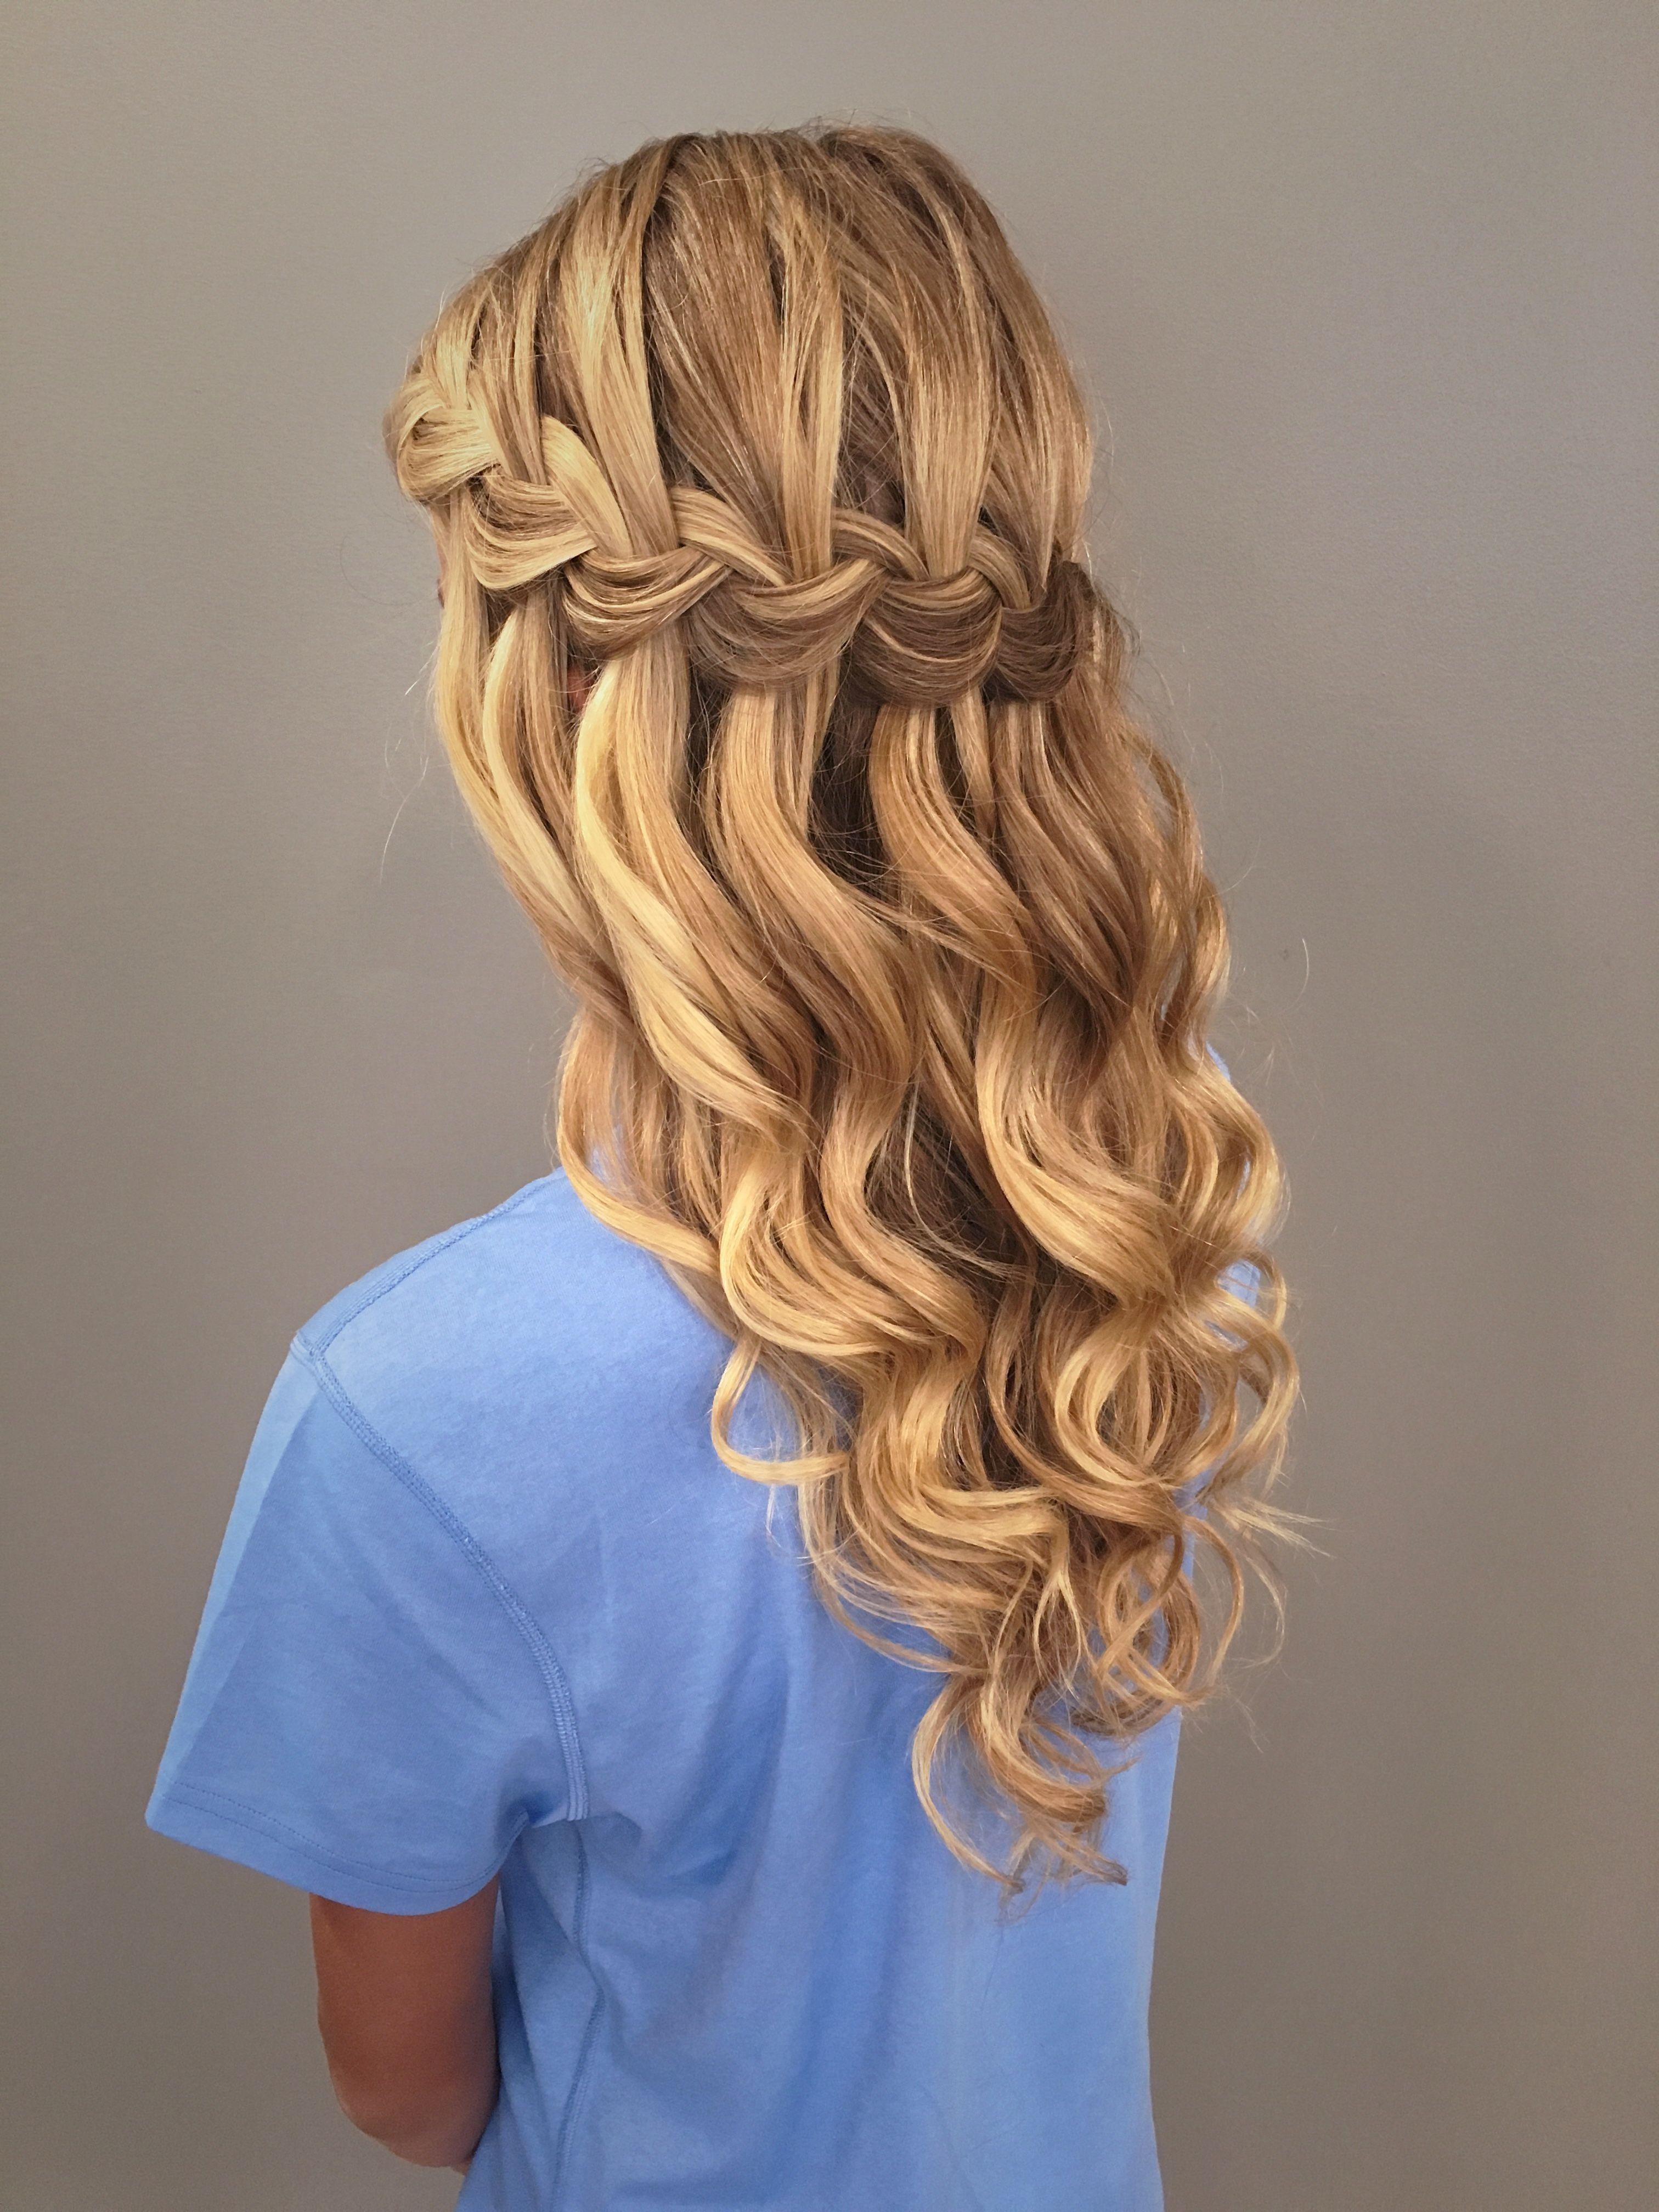 Prom Hairstyles Braid Throughout Most Popular Braided Hairstyles For Prom (View 2 of 15)